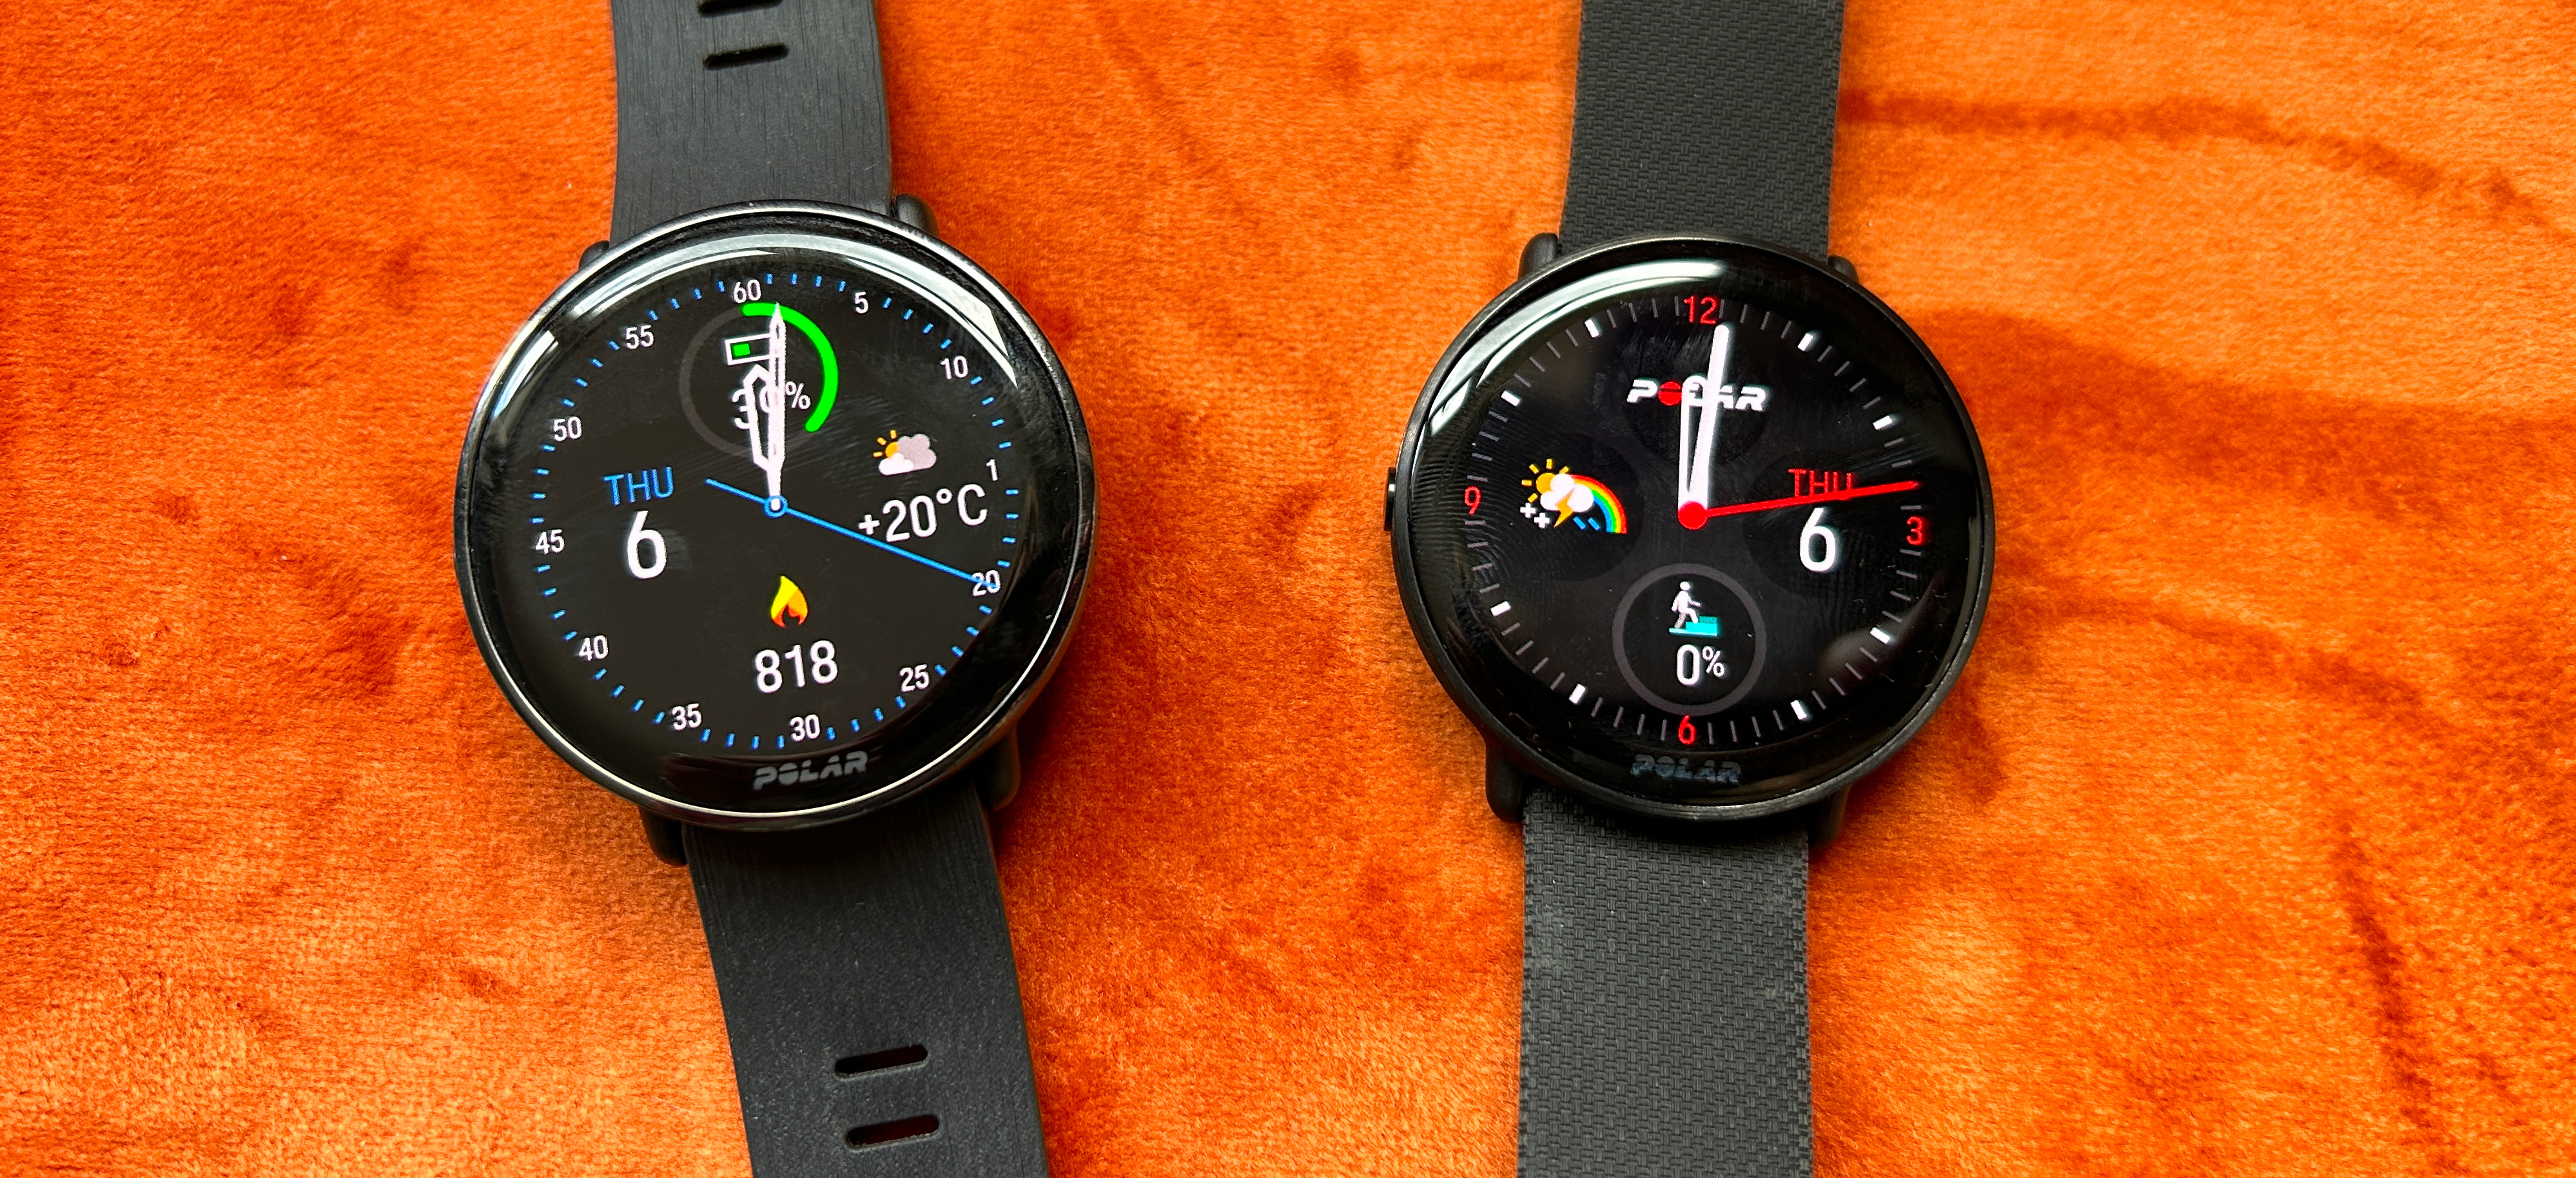 Polar's Ignite 3 Watch Blends Fitness With Your Circadian Rhythm - CNET